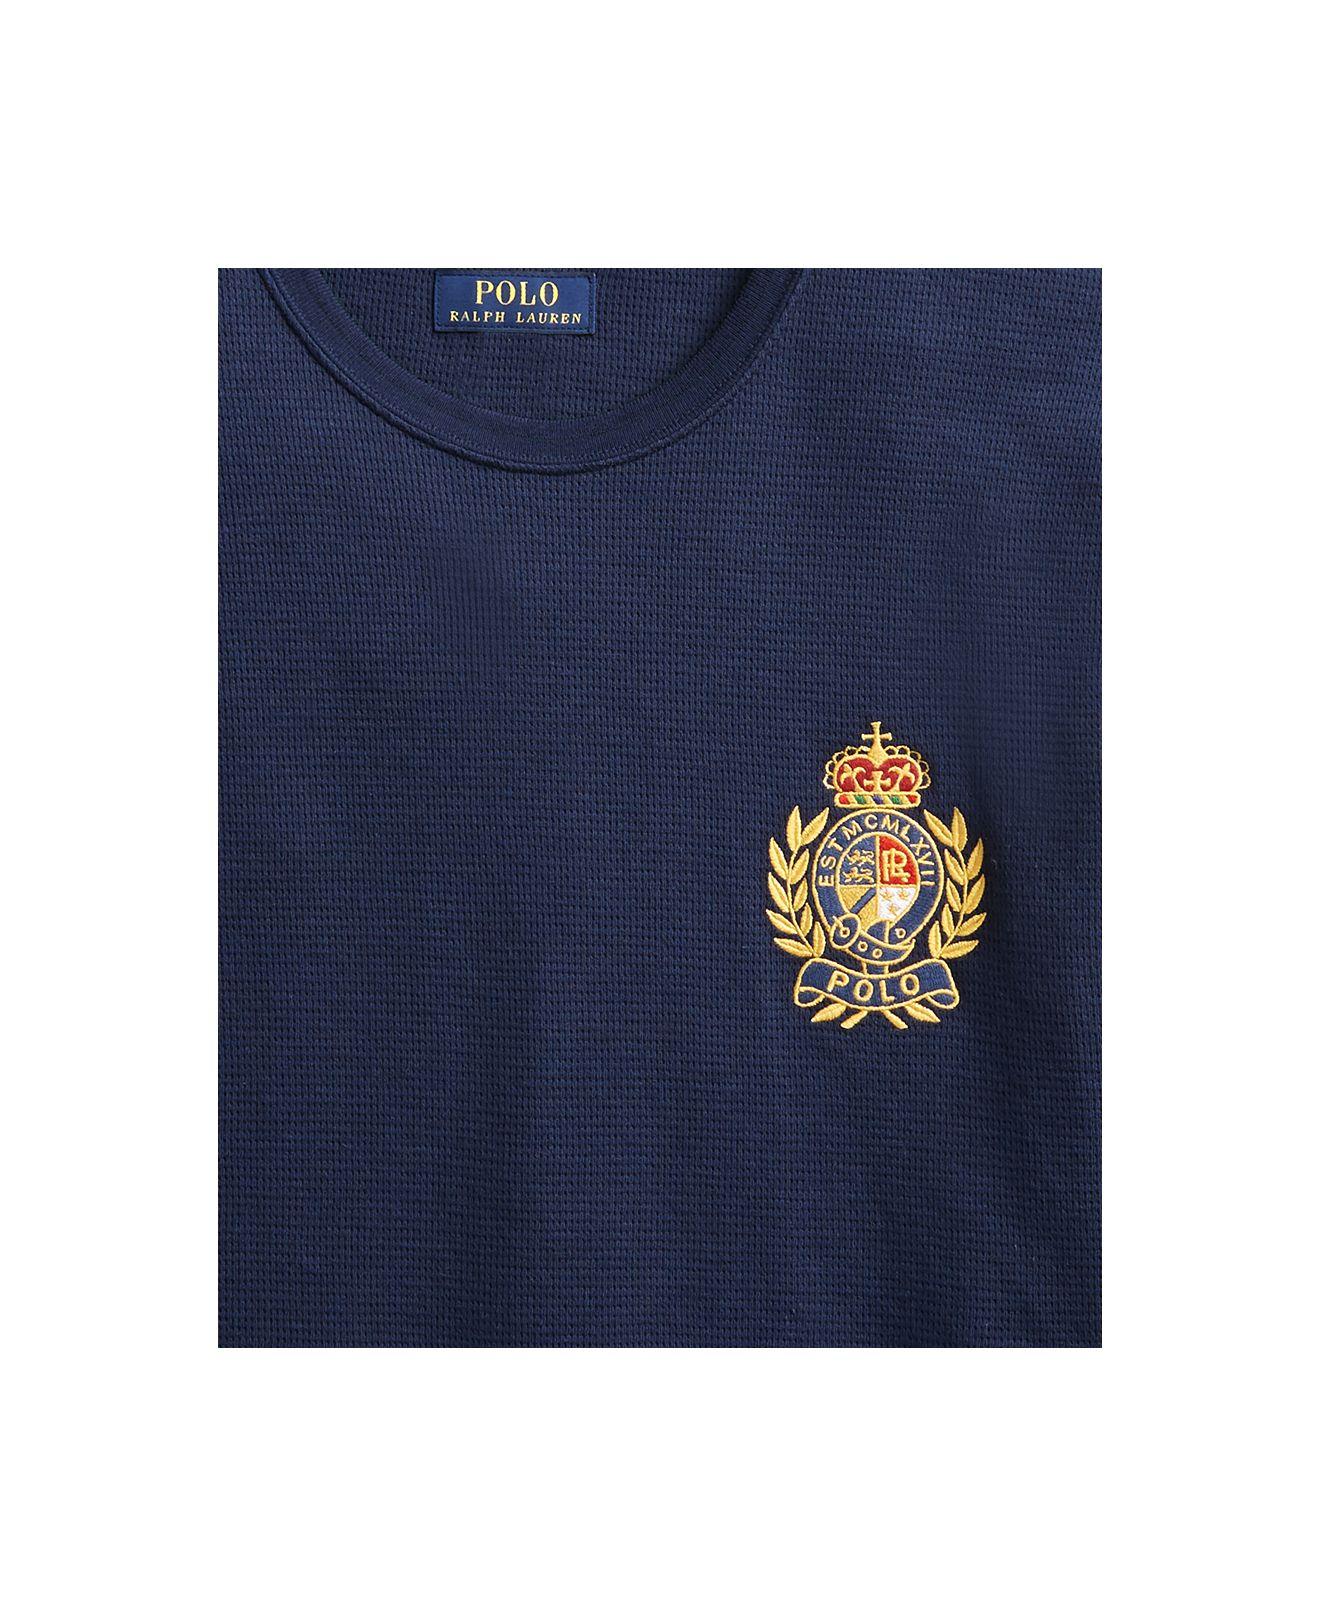 Polo Ralph Lauren Cotton Logo Crest Waffle Pajama Shirt, Created For Macy's  in Blue for Men - Lyst